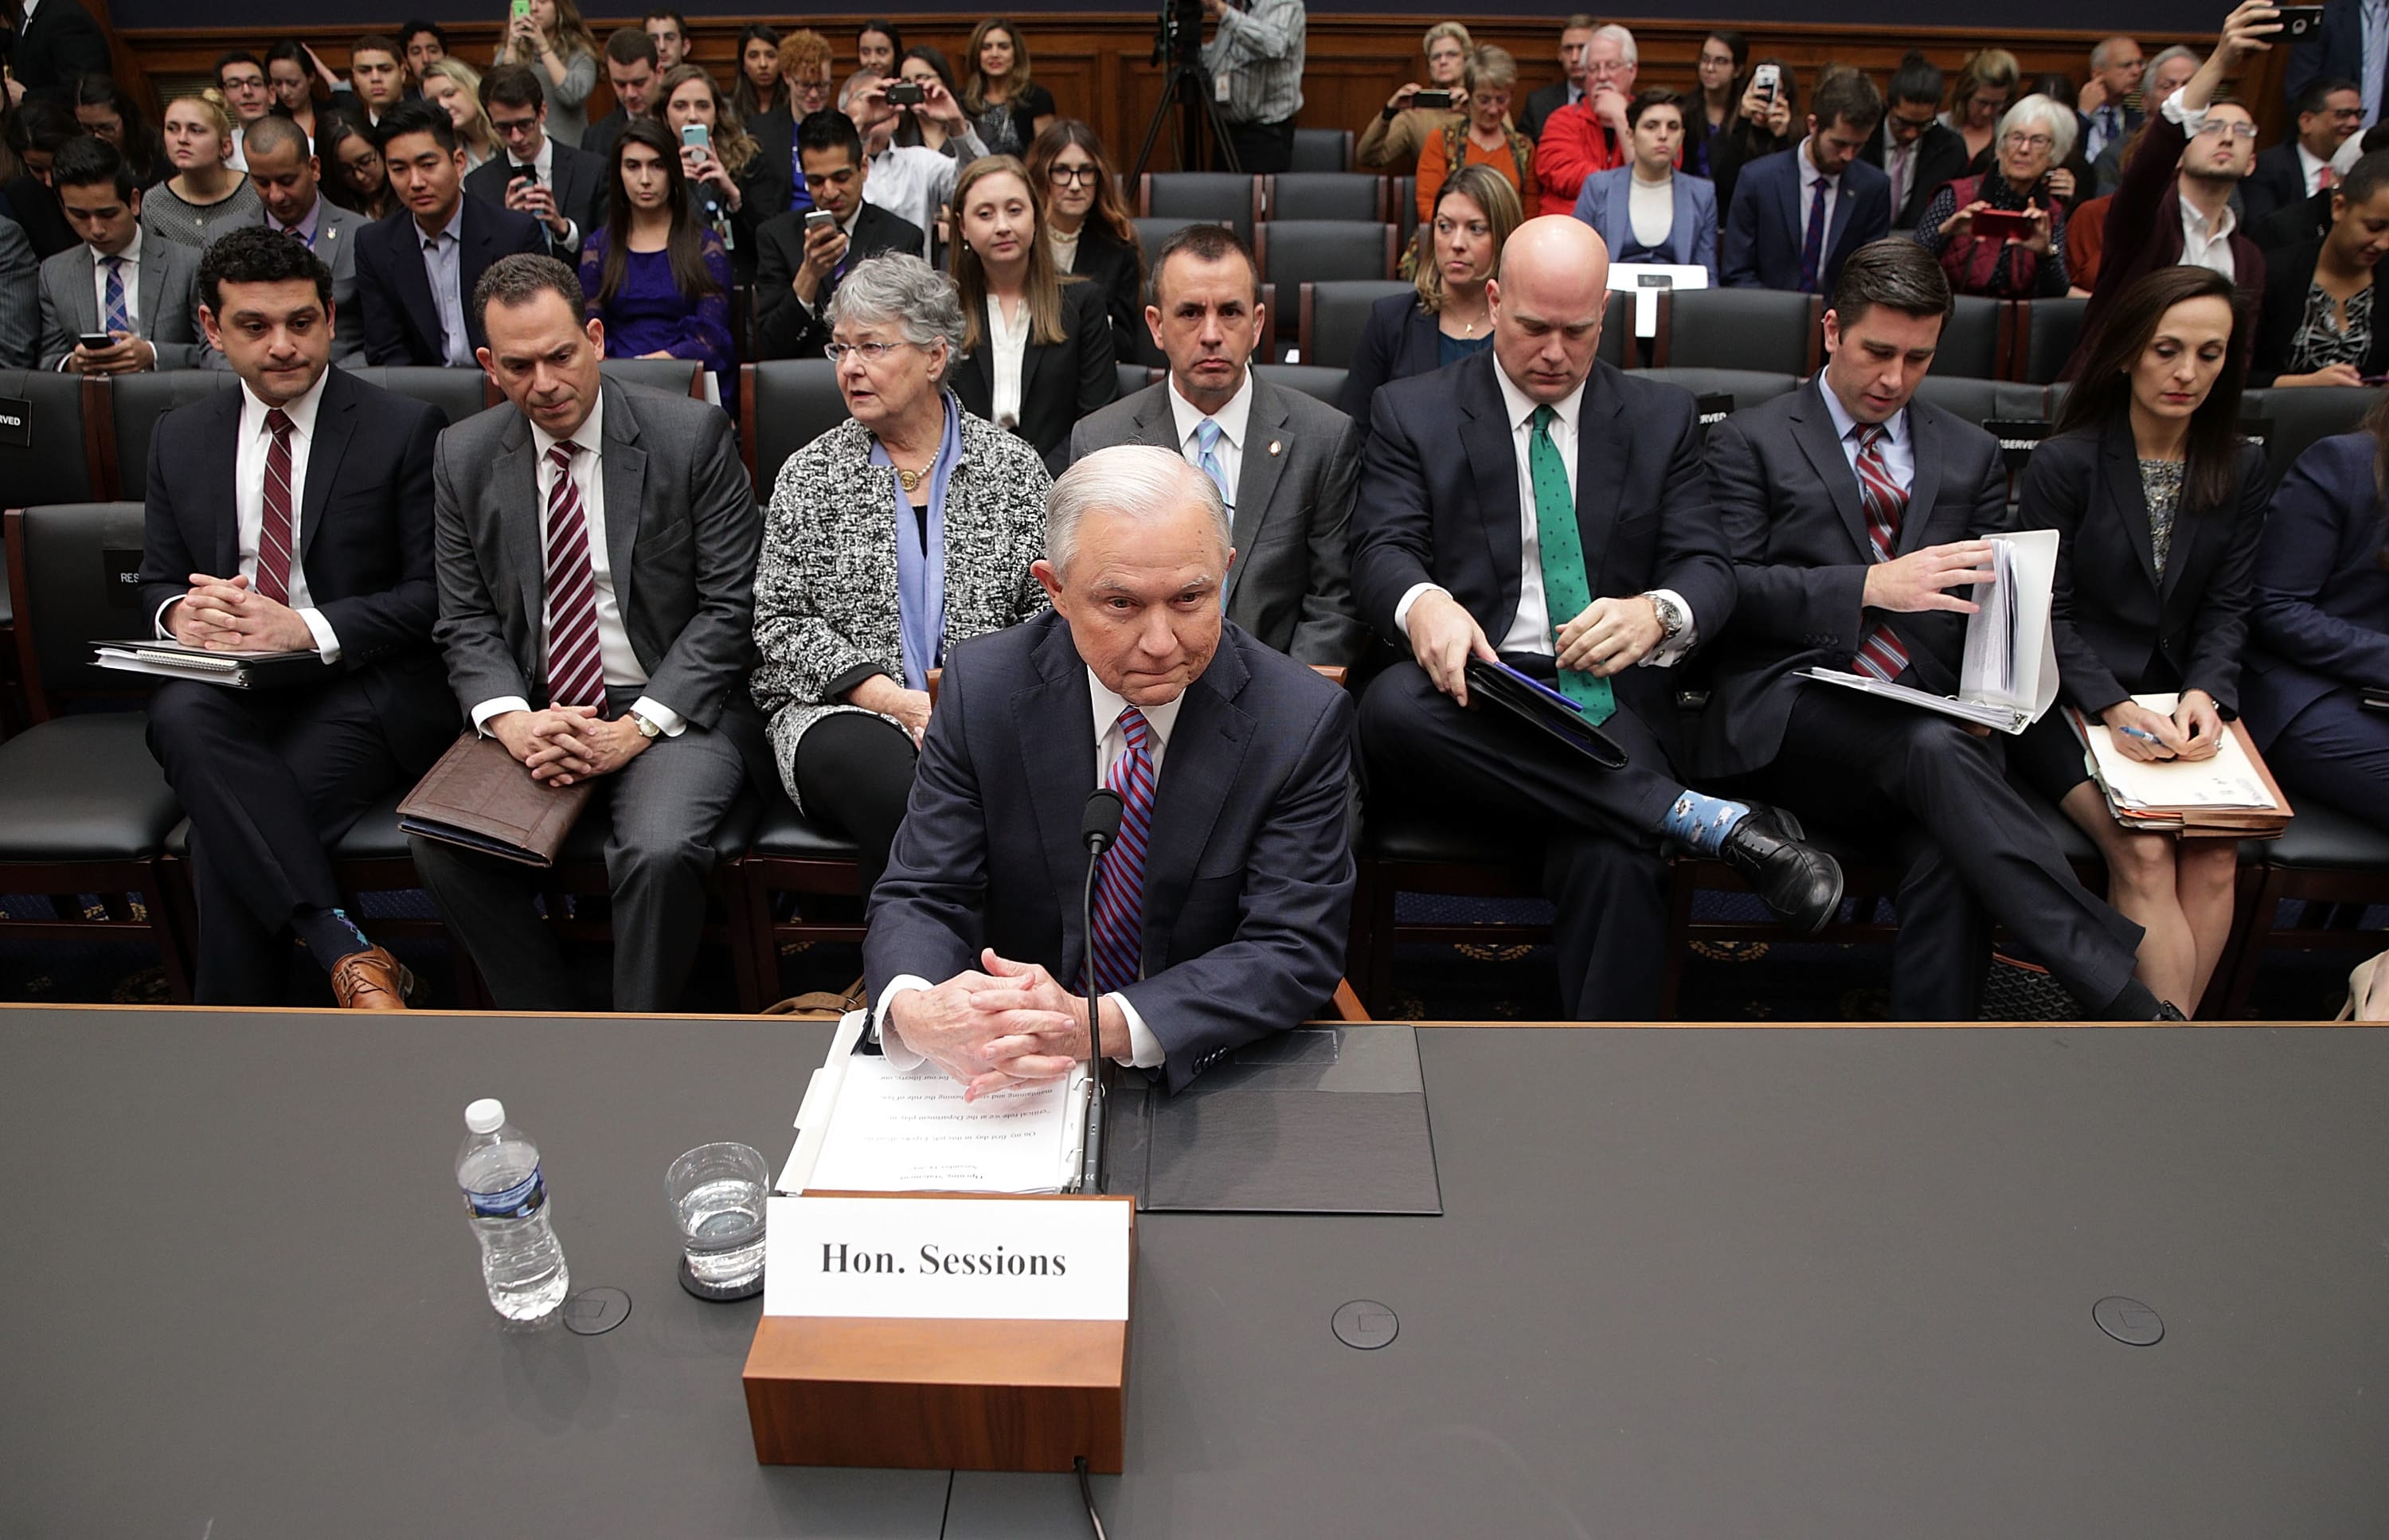 US Attorney General Jeff Sessions at the House Judiciary Committee hearing.